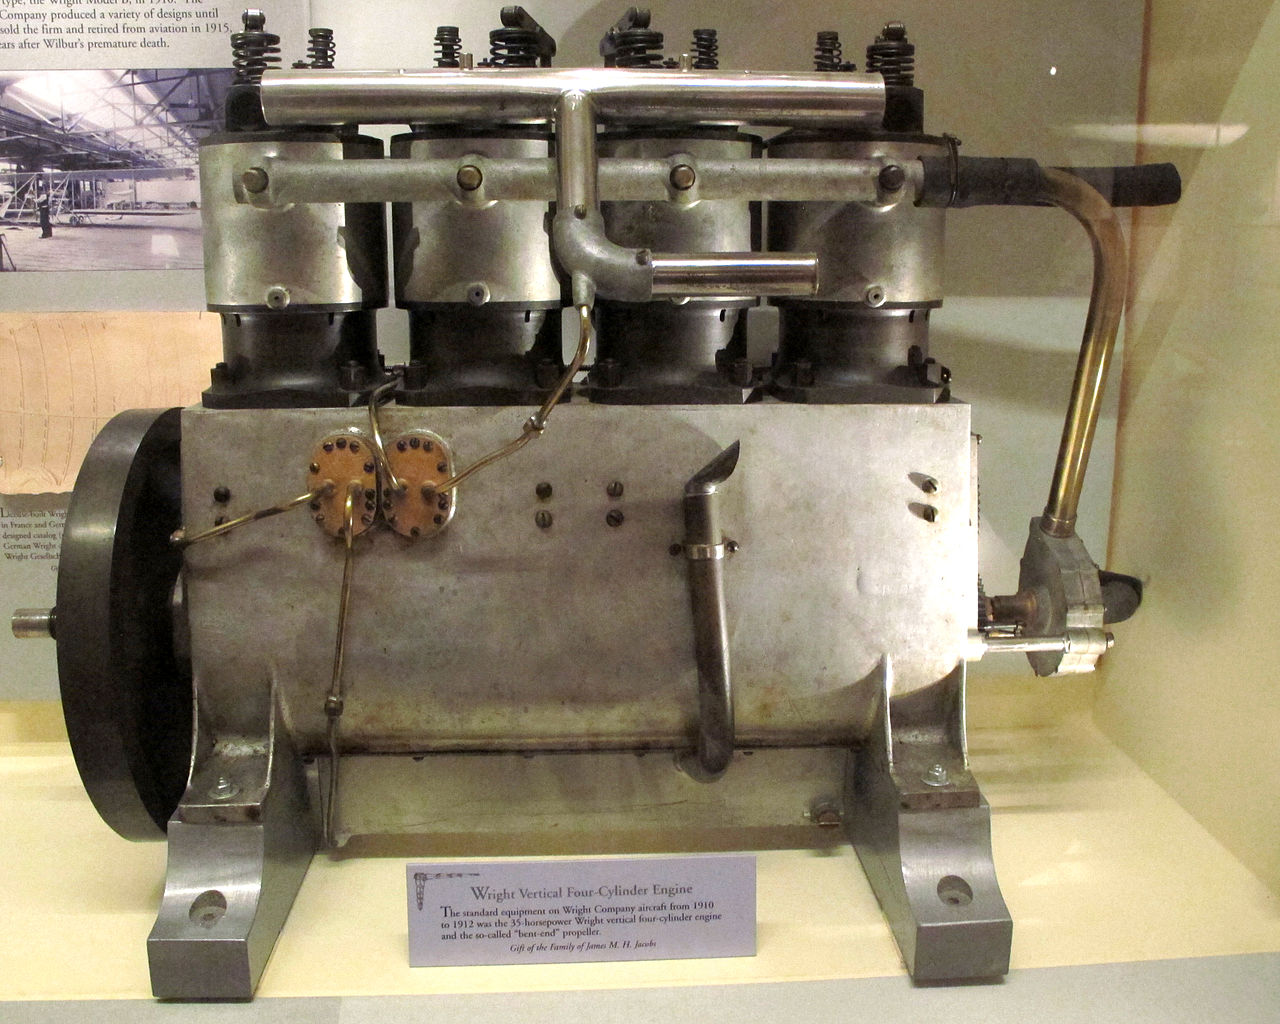 A Wright vertical four-cylinder engine at teh Smithsonian Institution National Air and Space Museum. (Sanjay Acharya/Wikipedia)